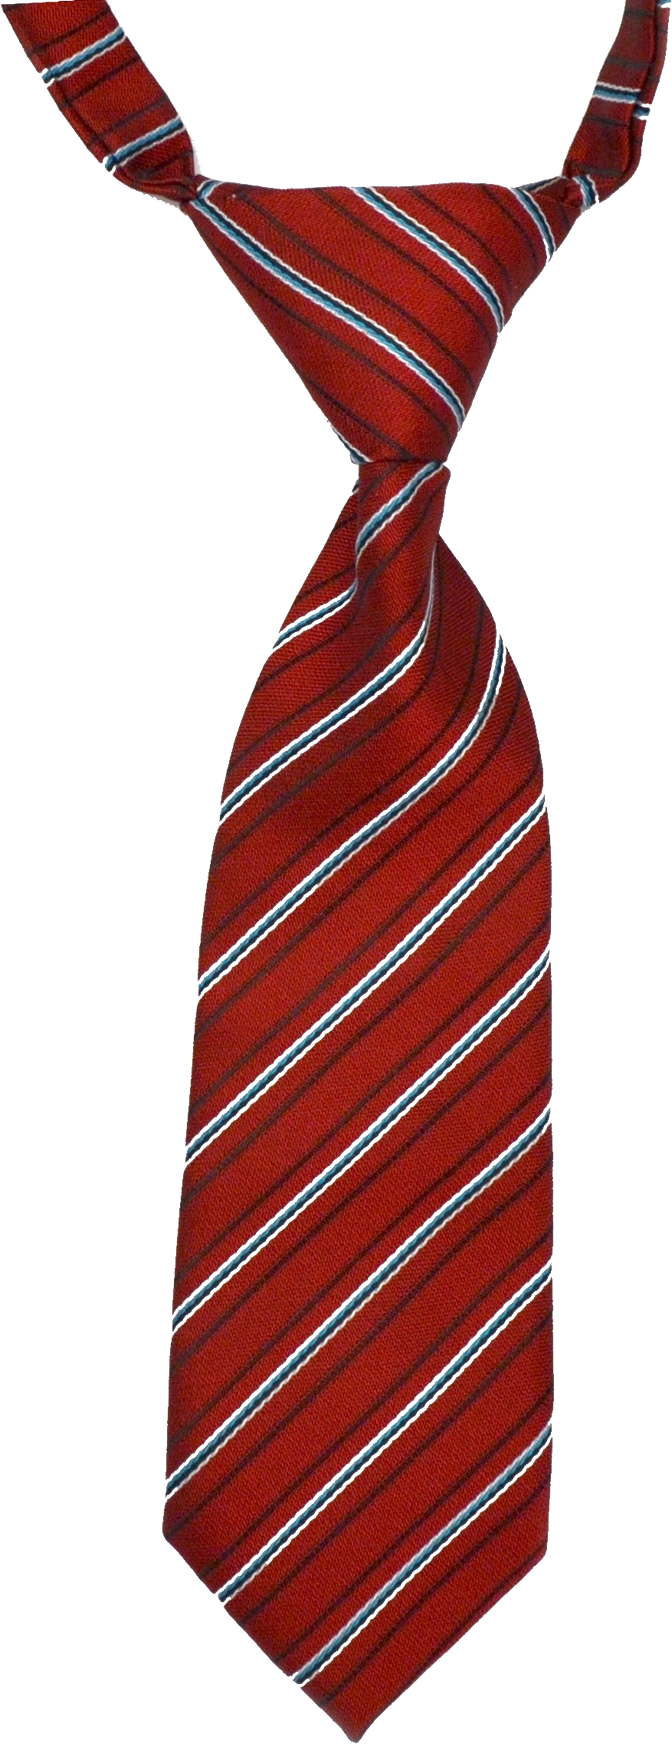 Tie Png Hd Png Image - Tie, Transparent background PNG HD thumbnail